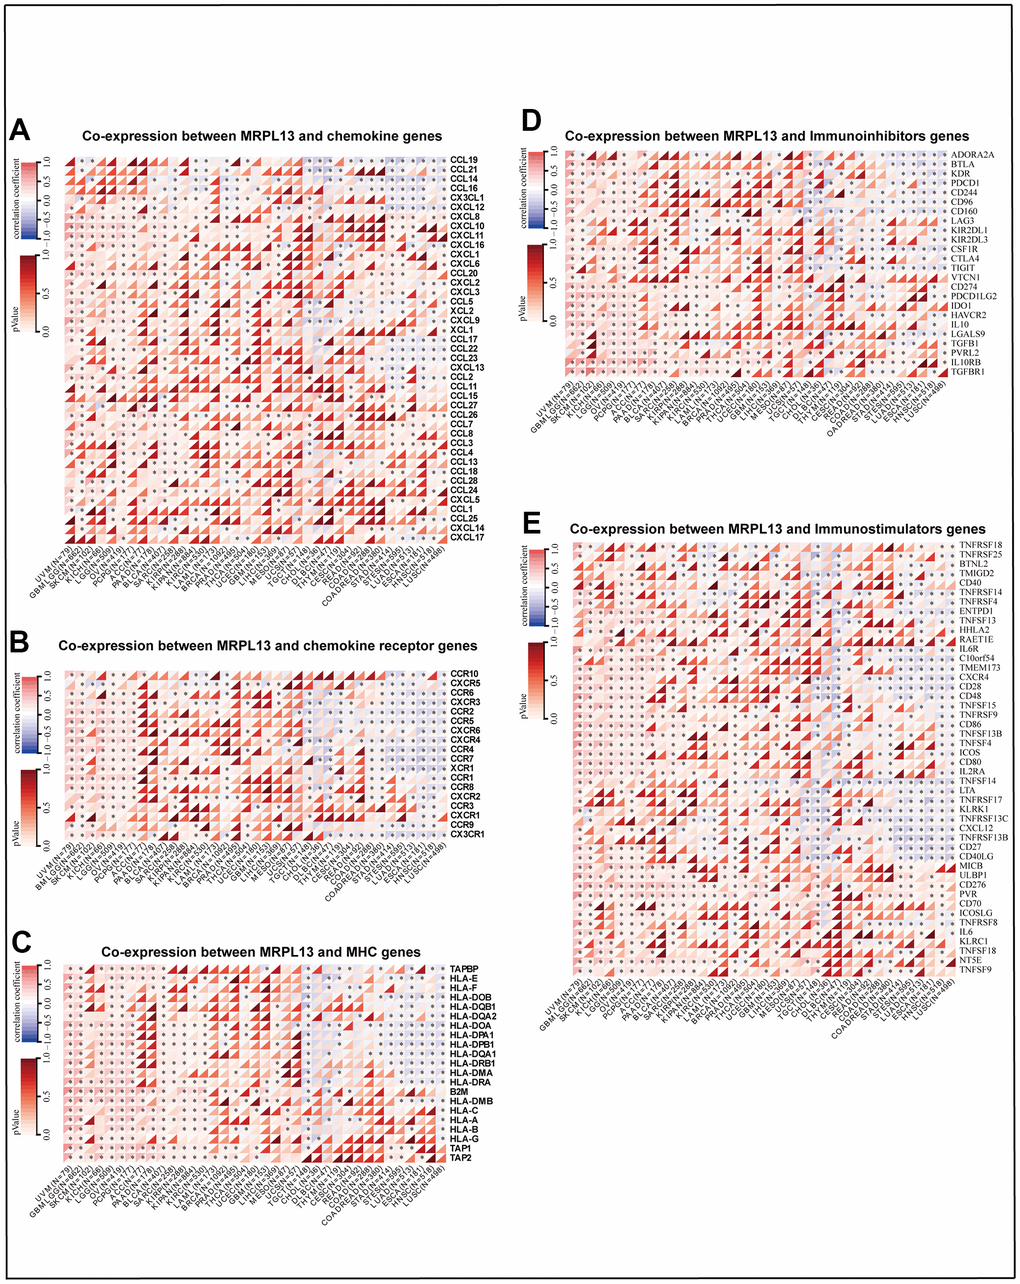 Heatmaps indicating the co-expression of MRPL13 with immune-relevant genes in pan-cancer. (A) Co-expression between MRPL13 and chemokine genes. (B) Co-expression between MRPL13 and chemokine receptor genes, (C) Co-expression between MRPL13 and MHC genes. (D) Co-expression between MRPL13 and Immunoinhibitors genes. (E) Co-expression between MRPL13 and Immunostimulators gene. *p-value 